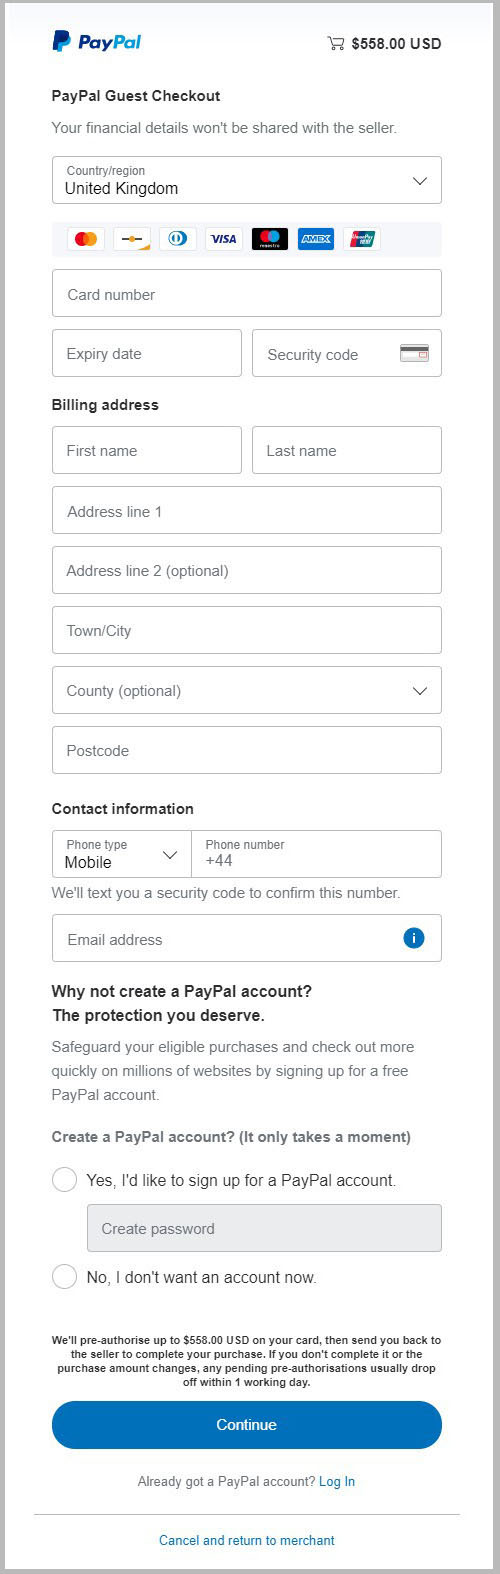 PayPal guest checkout with a debit or credit card for NON-USA customers.